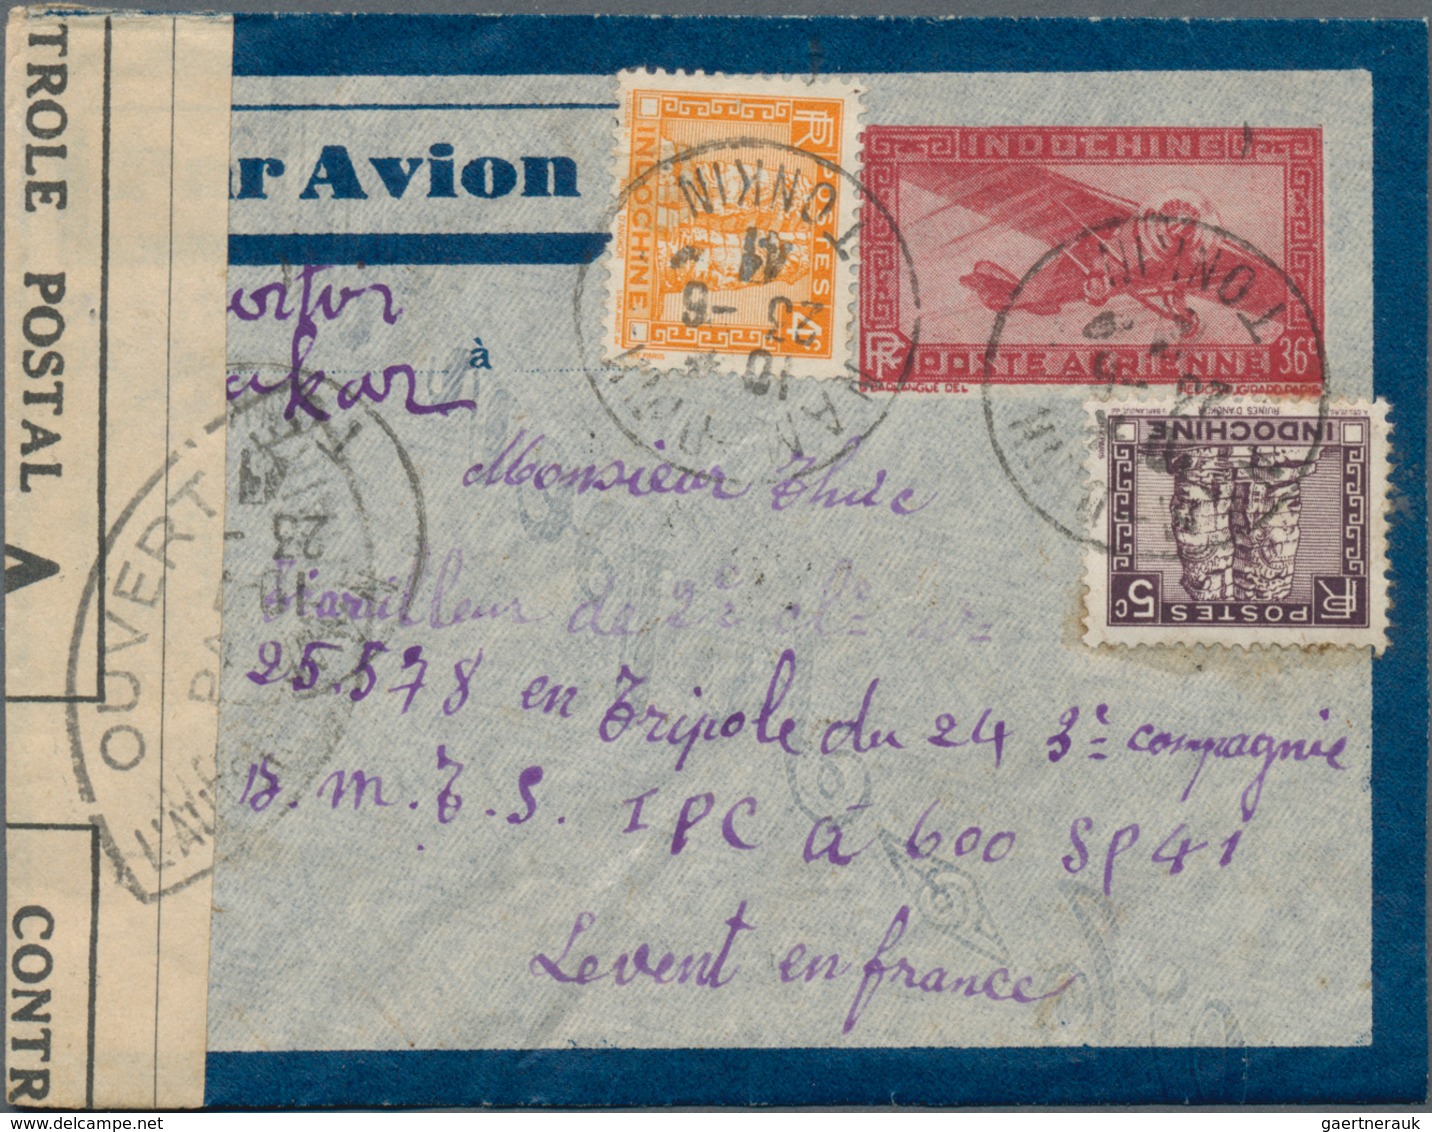 Französisch-Indochina: 1940/1941, WW II MILITARY MAIL to FRENCH LEVANT/PALESTINE/FRANCE, group of ei